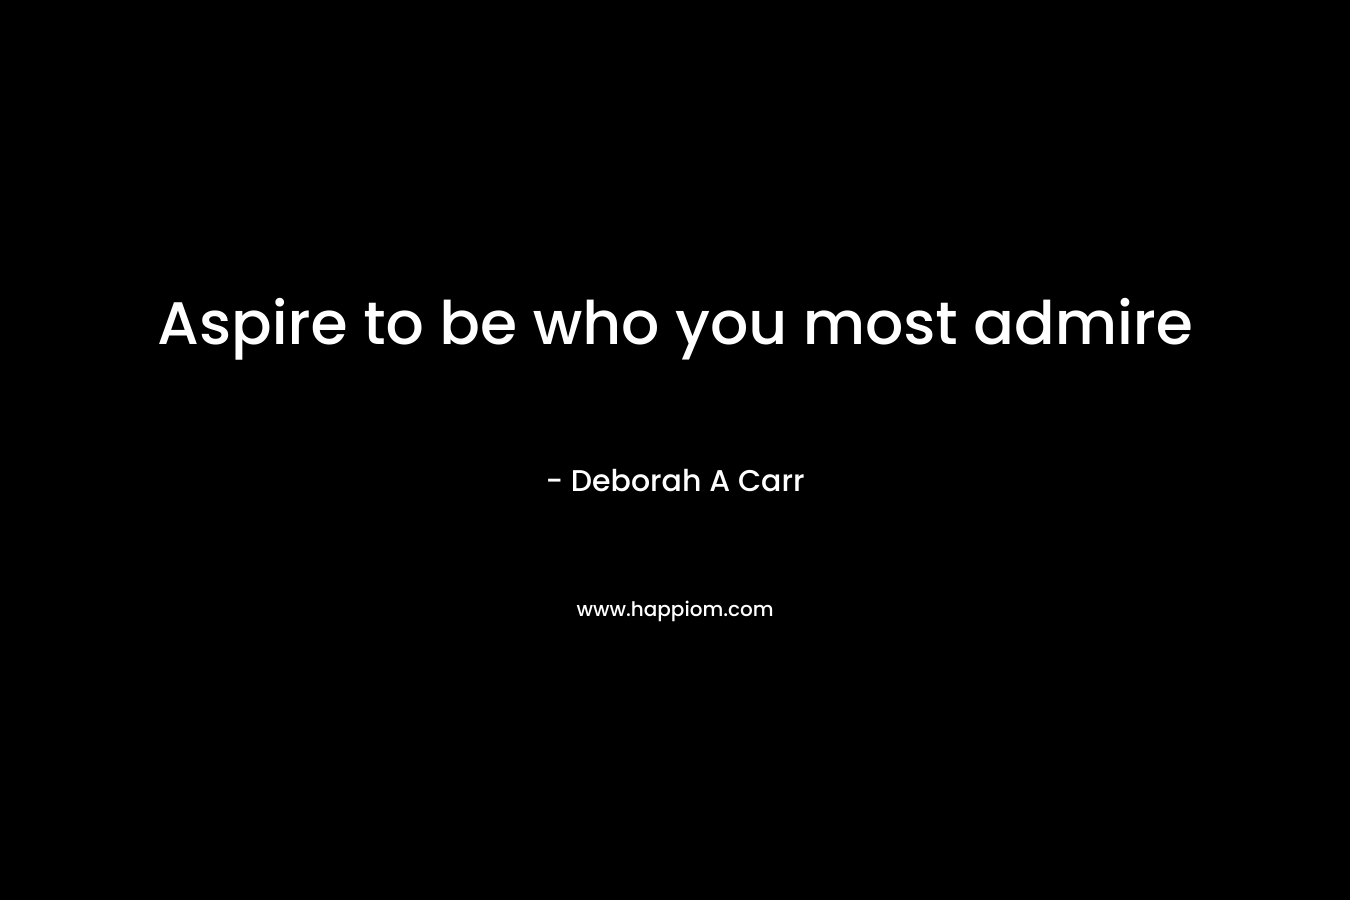 Aspire to be who you most admire